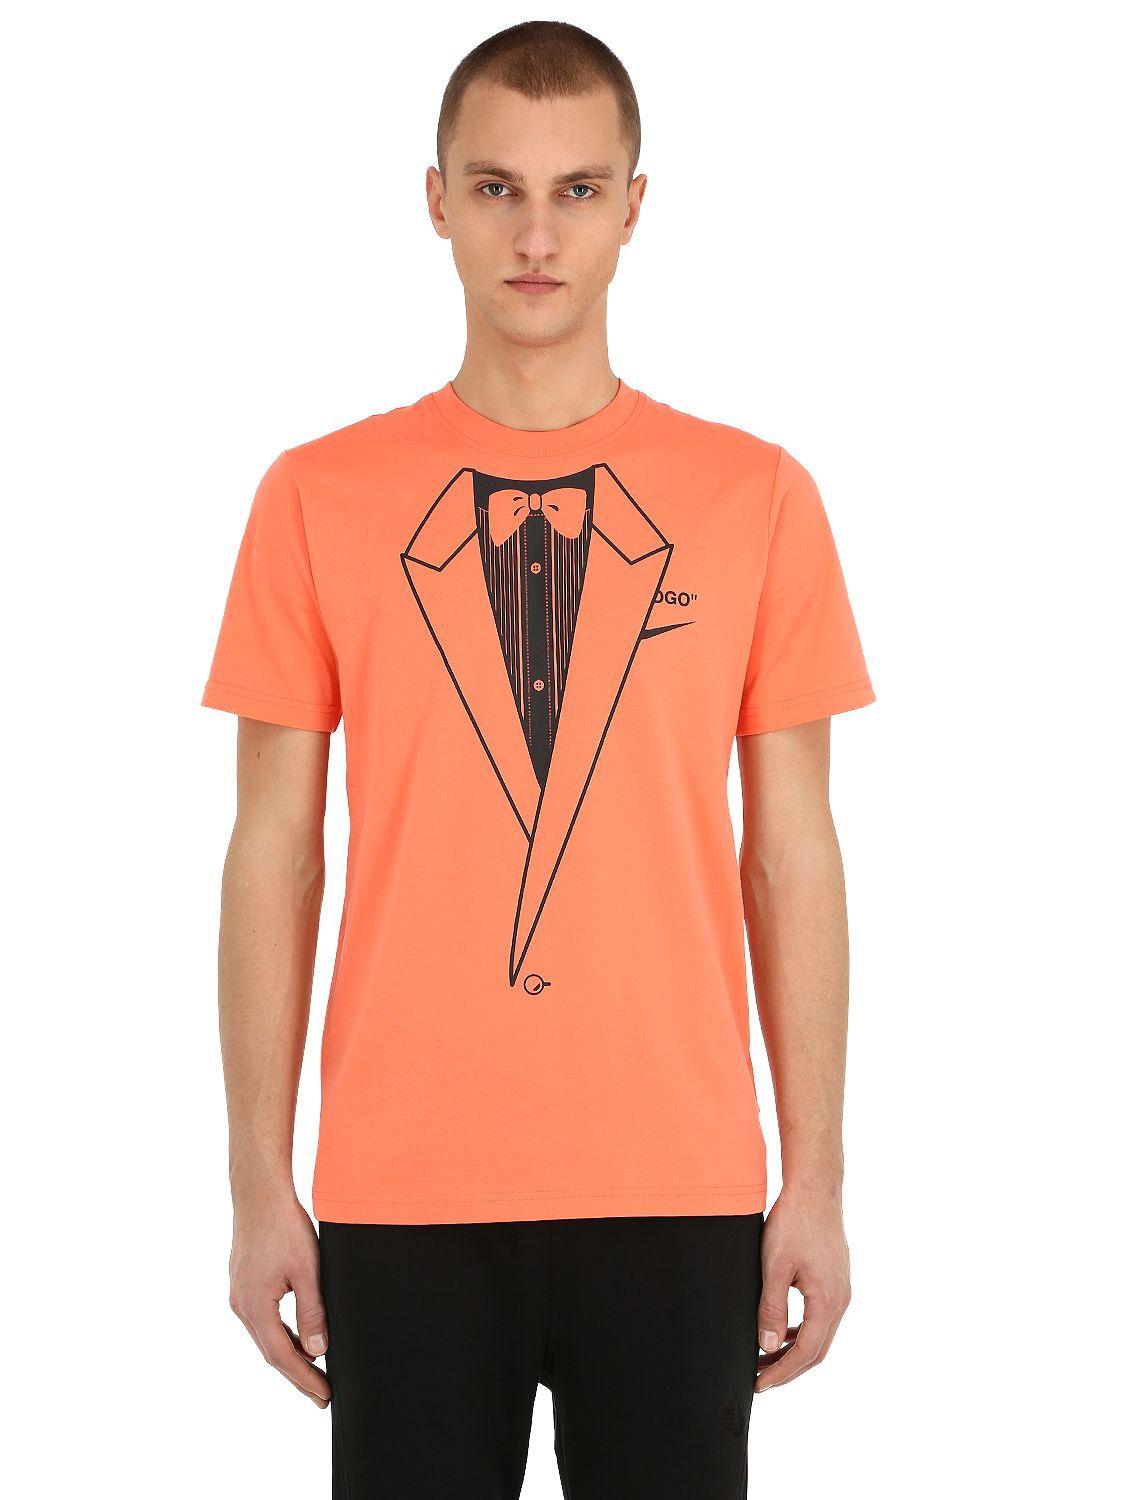 Nike Nrg Off-white A6 Cotton Jersey T-shirt in Orange for Men - Lyst